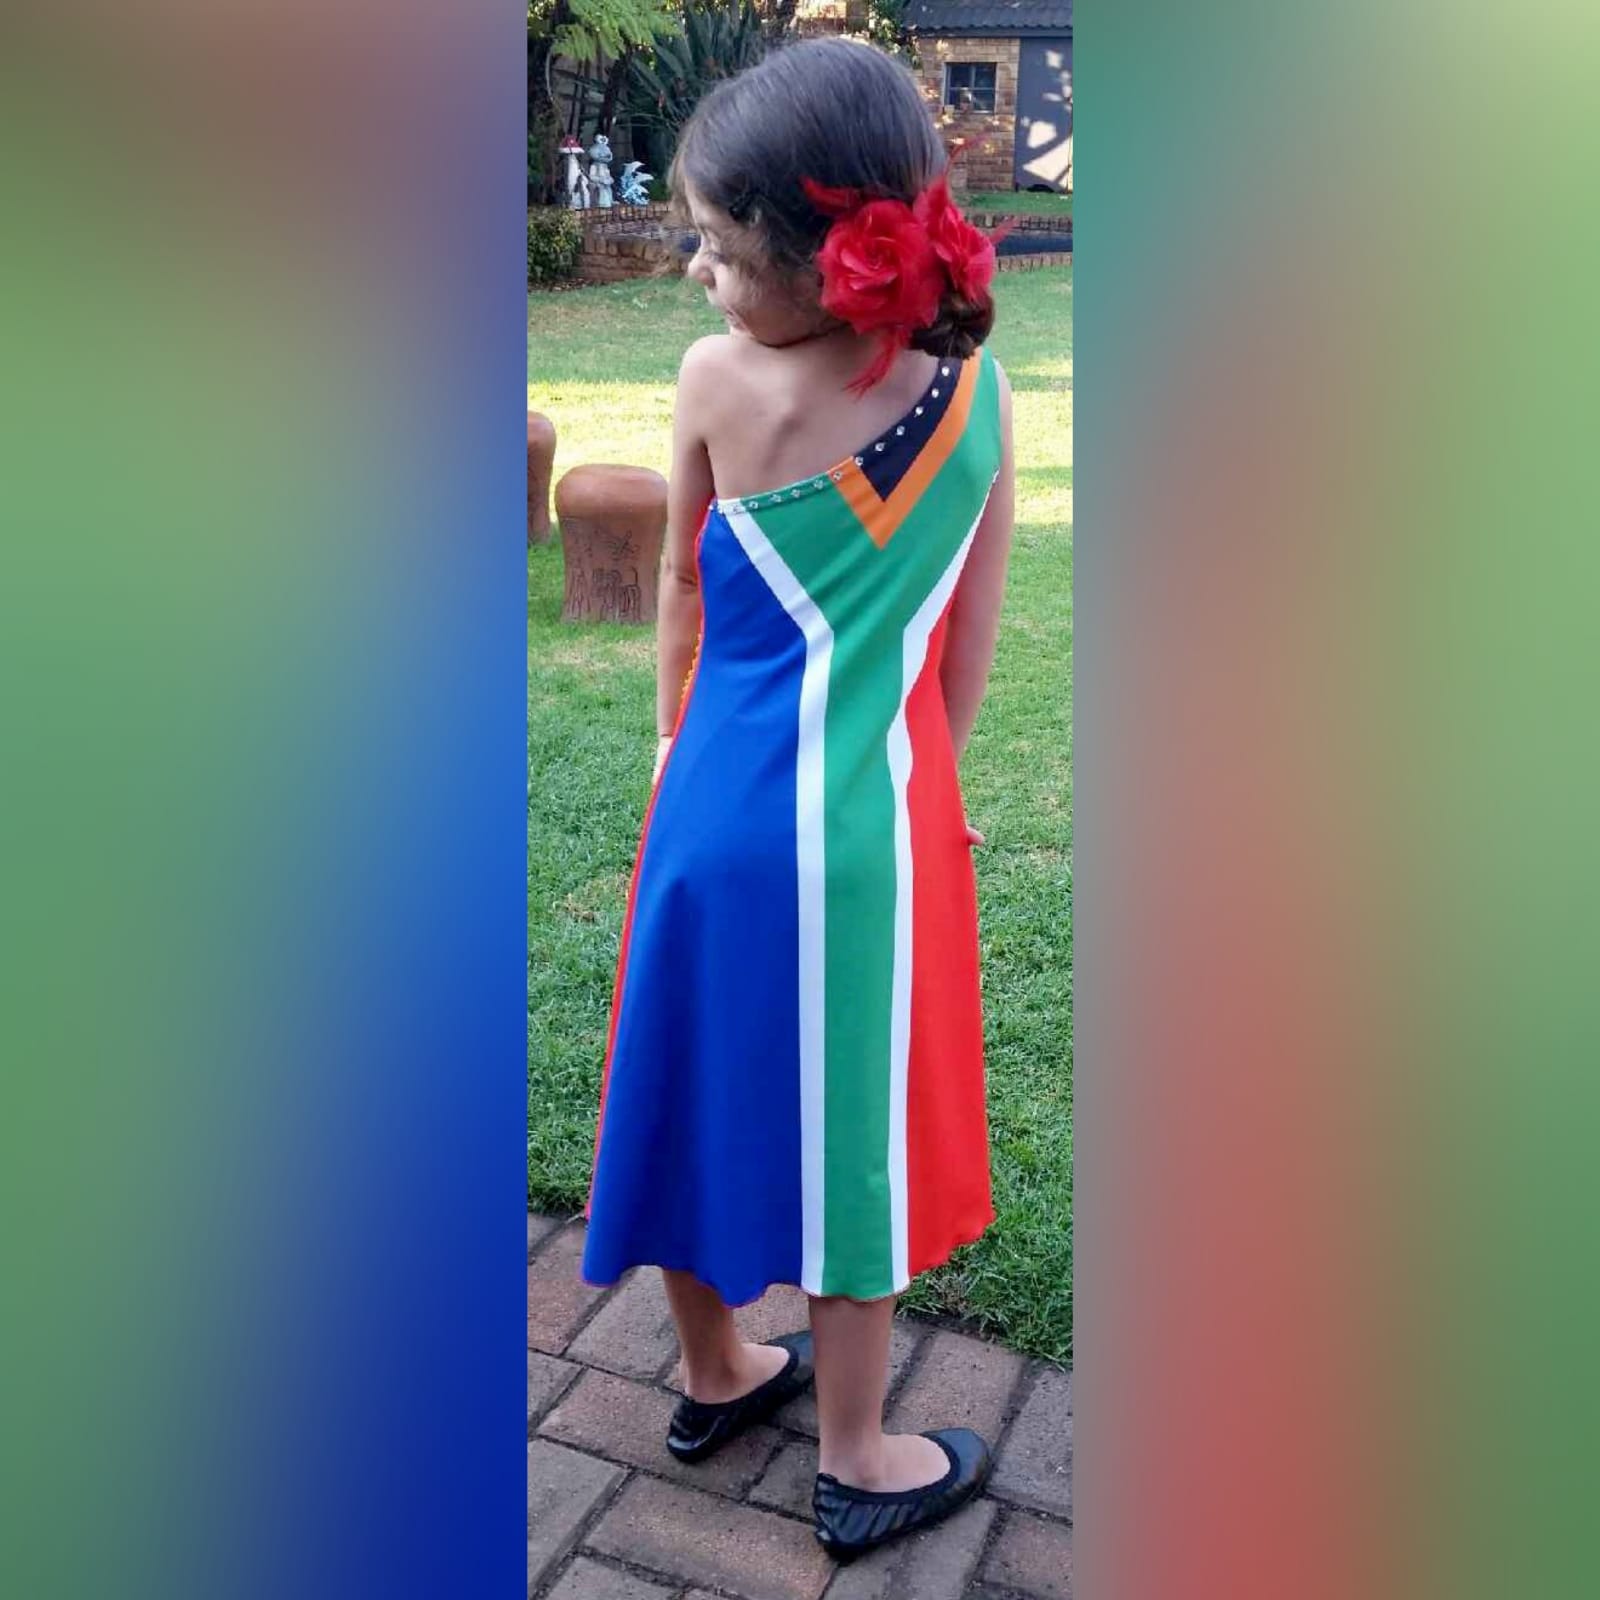 Portuguese flag and south african flag dress 2 single shoulder dress with the portuguese flag in the front and the south african flag at the back. Bead detailing on the front and the back. Worn for heritage day. She won a prize for best dressed.